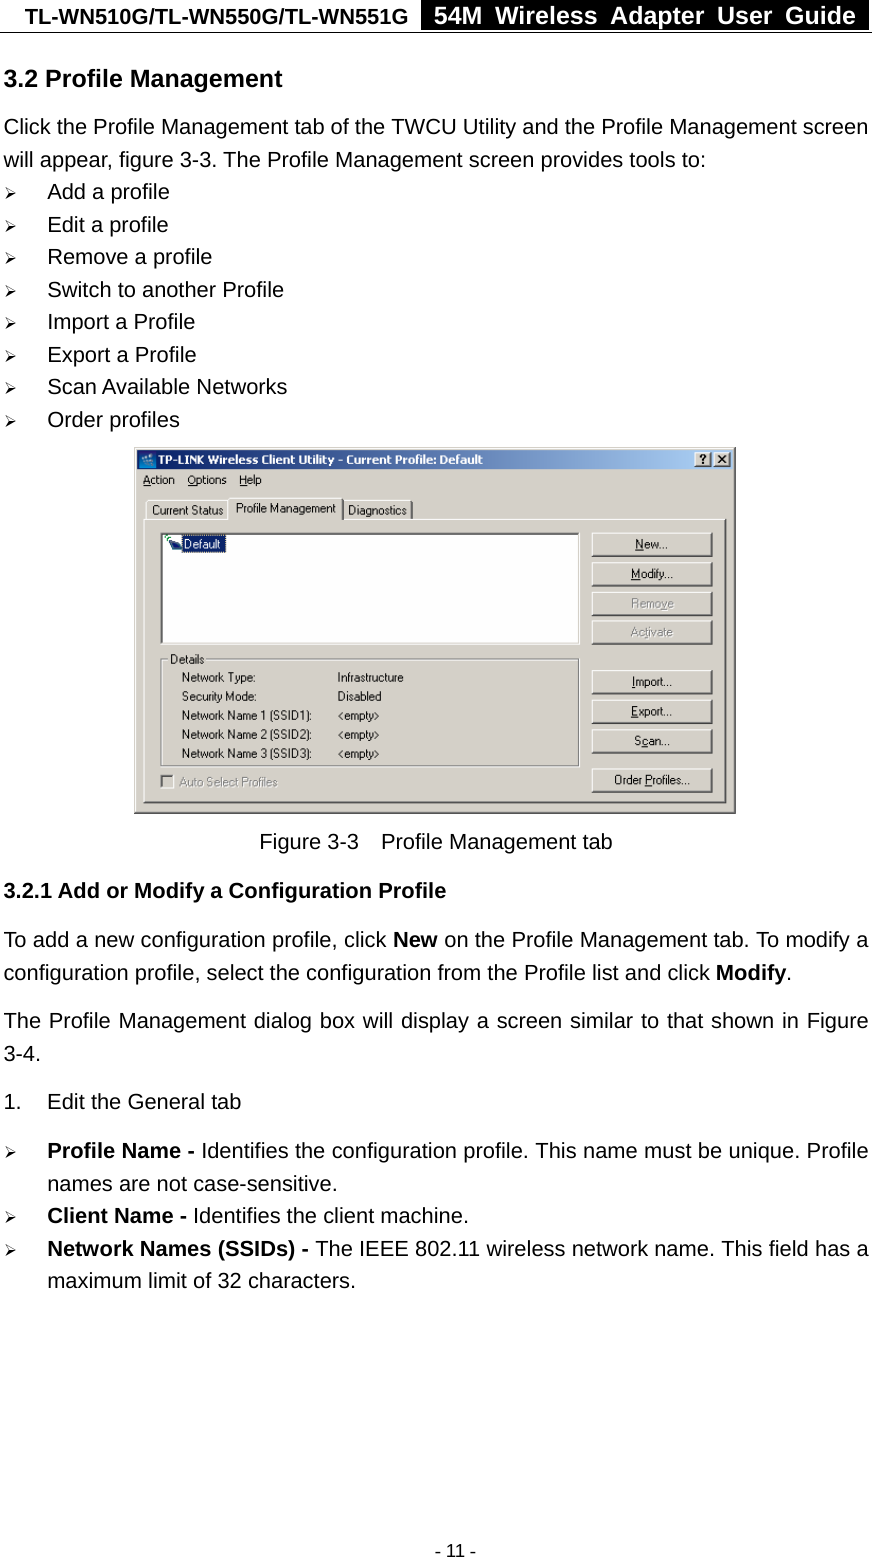 TL-WN510G/TL-WN550G/TL-WN551G  54M Wireless Adapter User Guide  3.2 Profile Management Click the Profile Management tab of the TWCU Utility and the Profile Management screen will appear, figure 3-3. The Profile Management screen provides tools to: ¾ Add a profile ¾ Edit a profile ¾ Remove a profile ¾ Switch to another Profile ¾ Import a Profile ¾ Export a Profile ¾ Scan Available Networks ¾ Order profiles  Figure 3-3    Profile Management tab 3.2.1 Add or Modify a Configuration Profile To add a new configuration profile, click New on the Profile Management tab. To modify a configuration profile, select the configuration from the Profile list and click Modify. The Profile Management dialog box will display a screen similar to that shown in Figure 3-4. 1.  Edit the General tab ¾ Profile Name - Identifies the configuration profile. This name must be unique. Profile names are not case-sensitive. ¾ Client Name - Identifies the client machine. ¾ Network Names (SSIDs) - The IEEE 802.11 wireless network name. This field has a maximum limit of 32 characters.  - 11 -